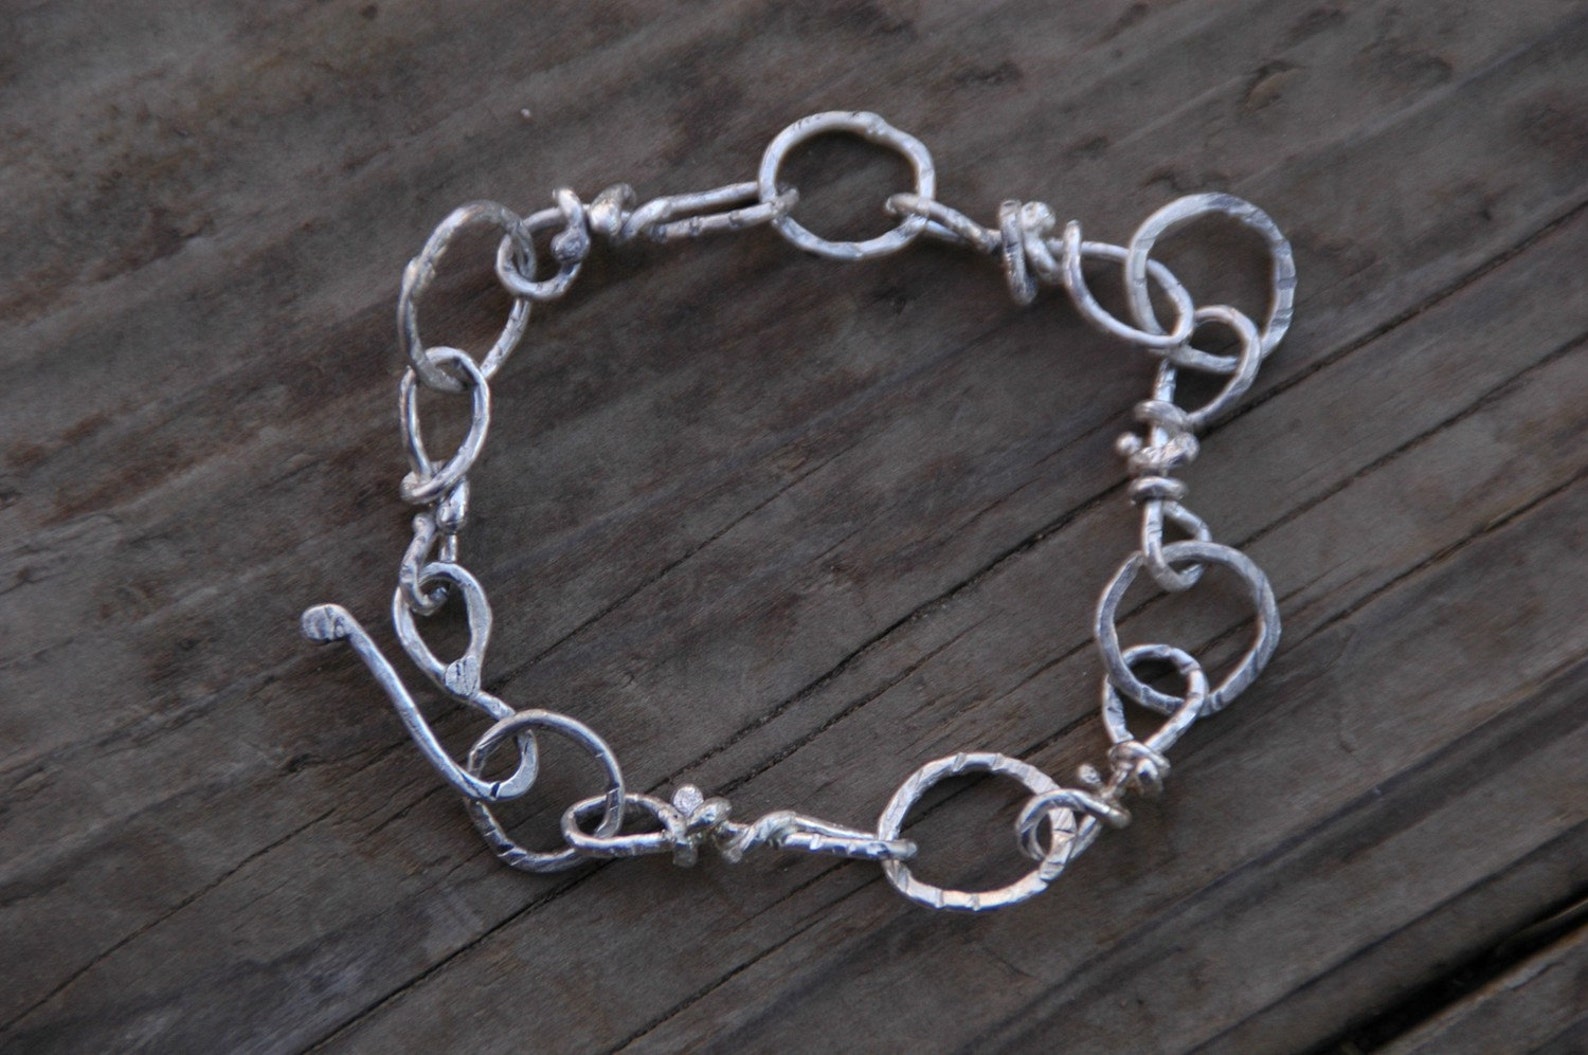 Buy Chain Link Linked Chain Bracelet Hand Hewn Sterling Silver Online ...